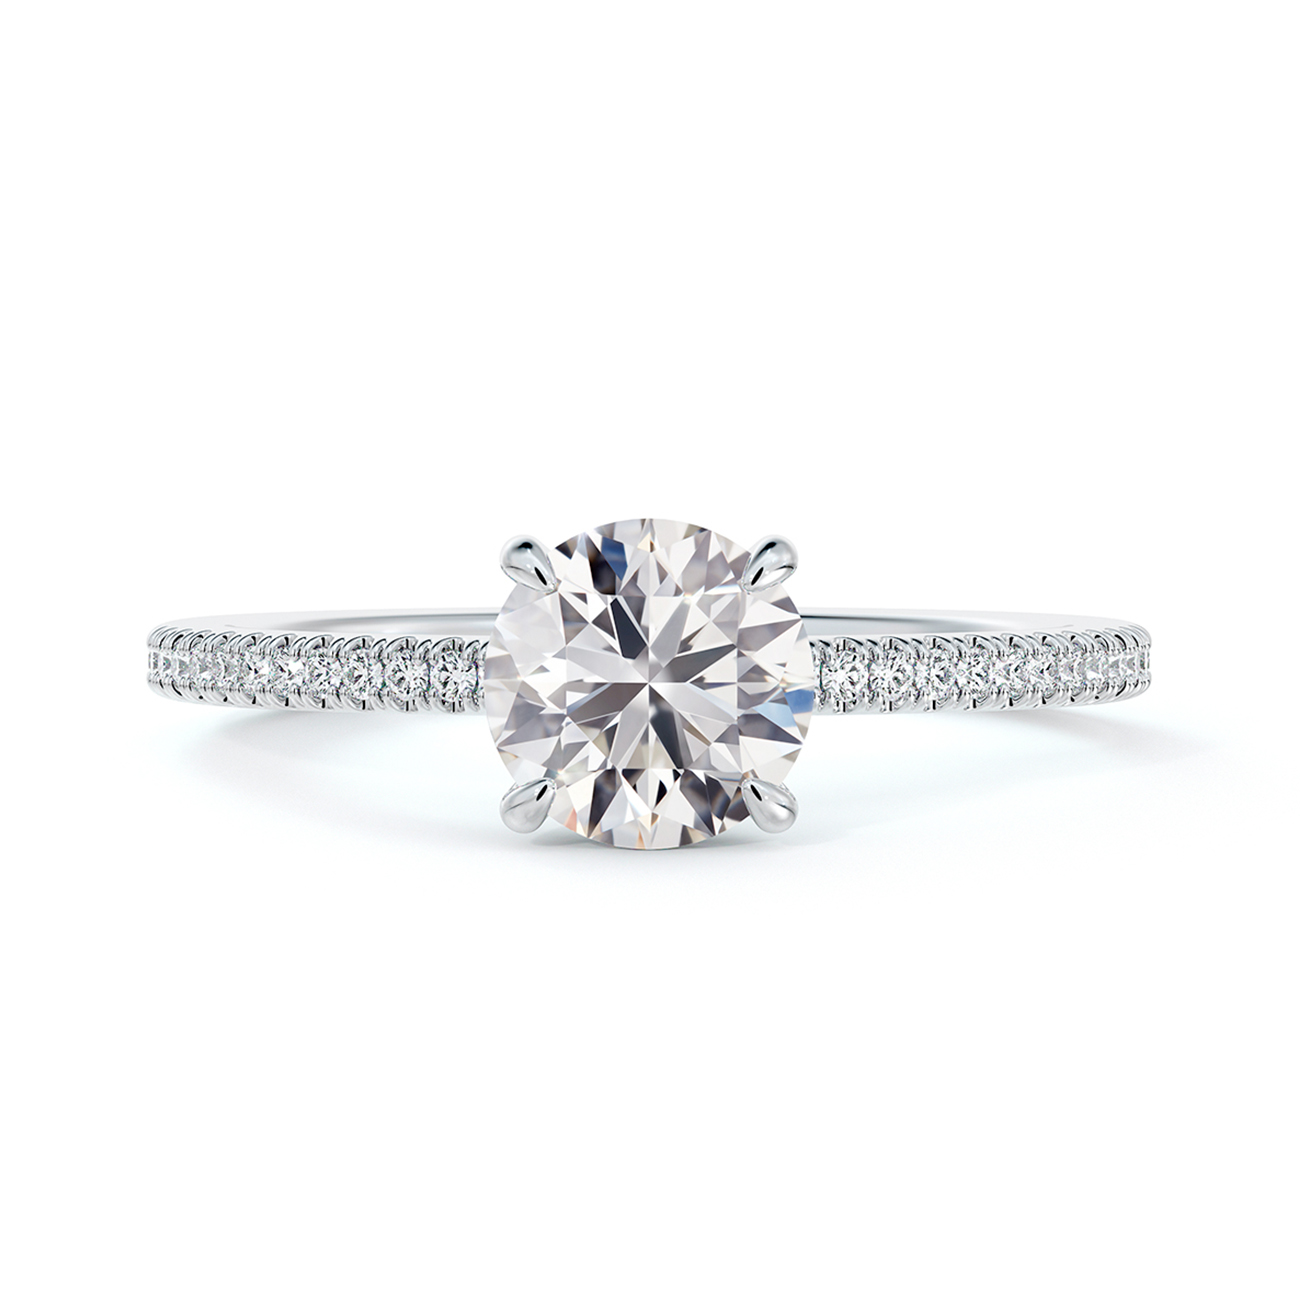 Forevermark Platinum Ring With One  0.70Ct Forevermark Round H Si2 Diamond And 48=0.13Tw Round G/H Si2 Diamonds